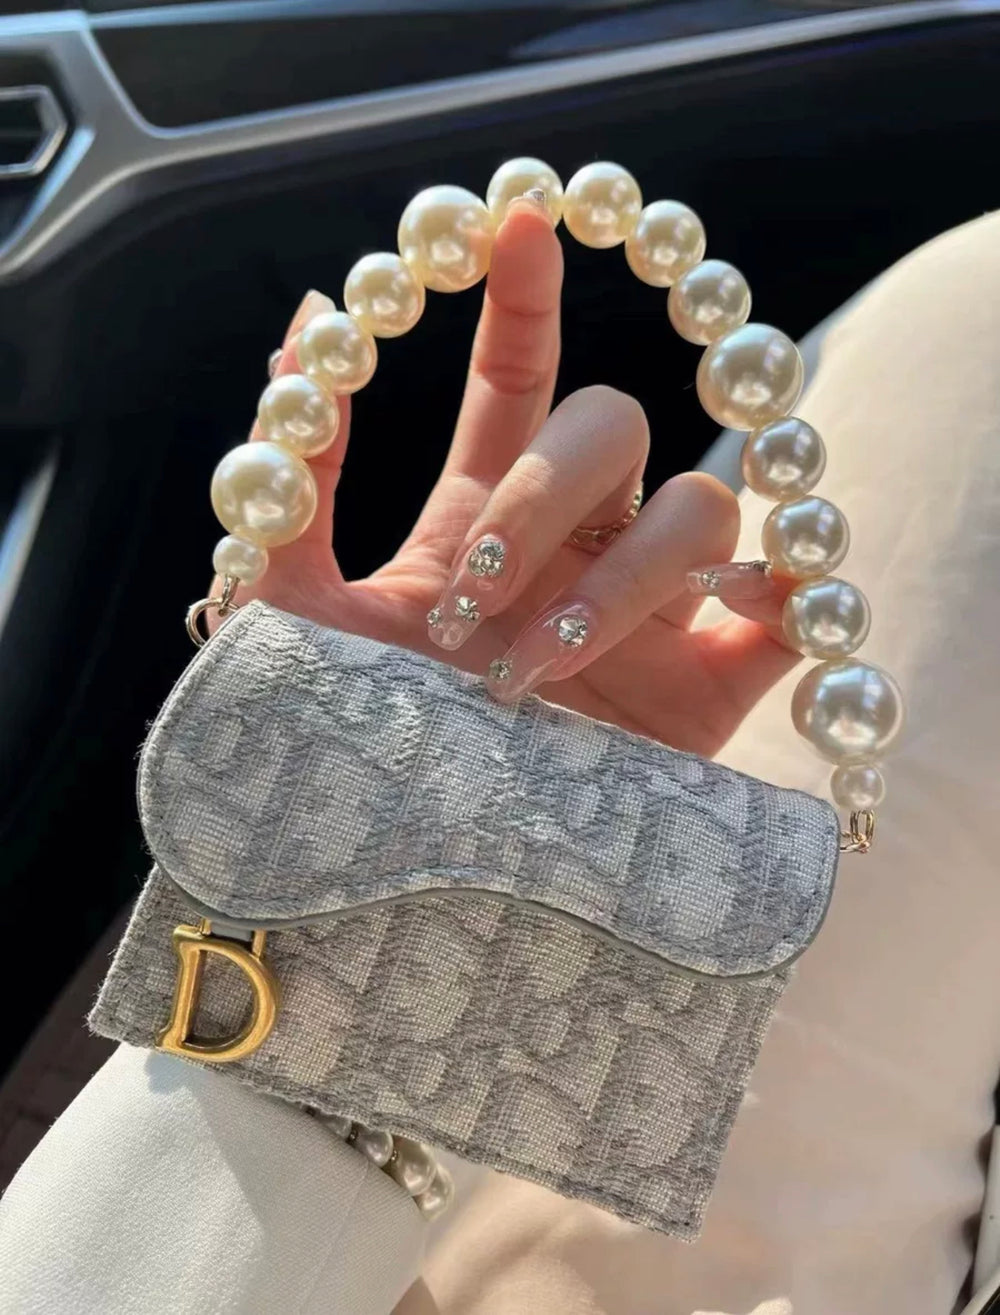 Yulia C. review of Converter Kit for Dior Card Holder